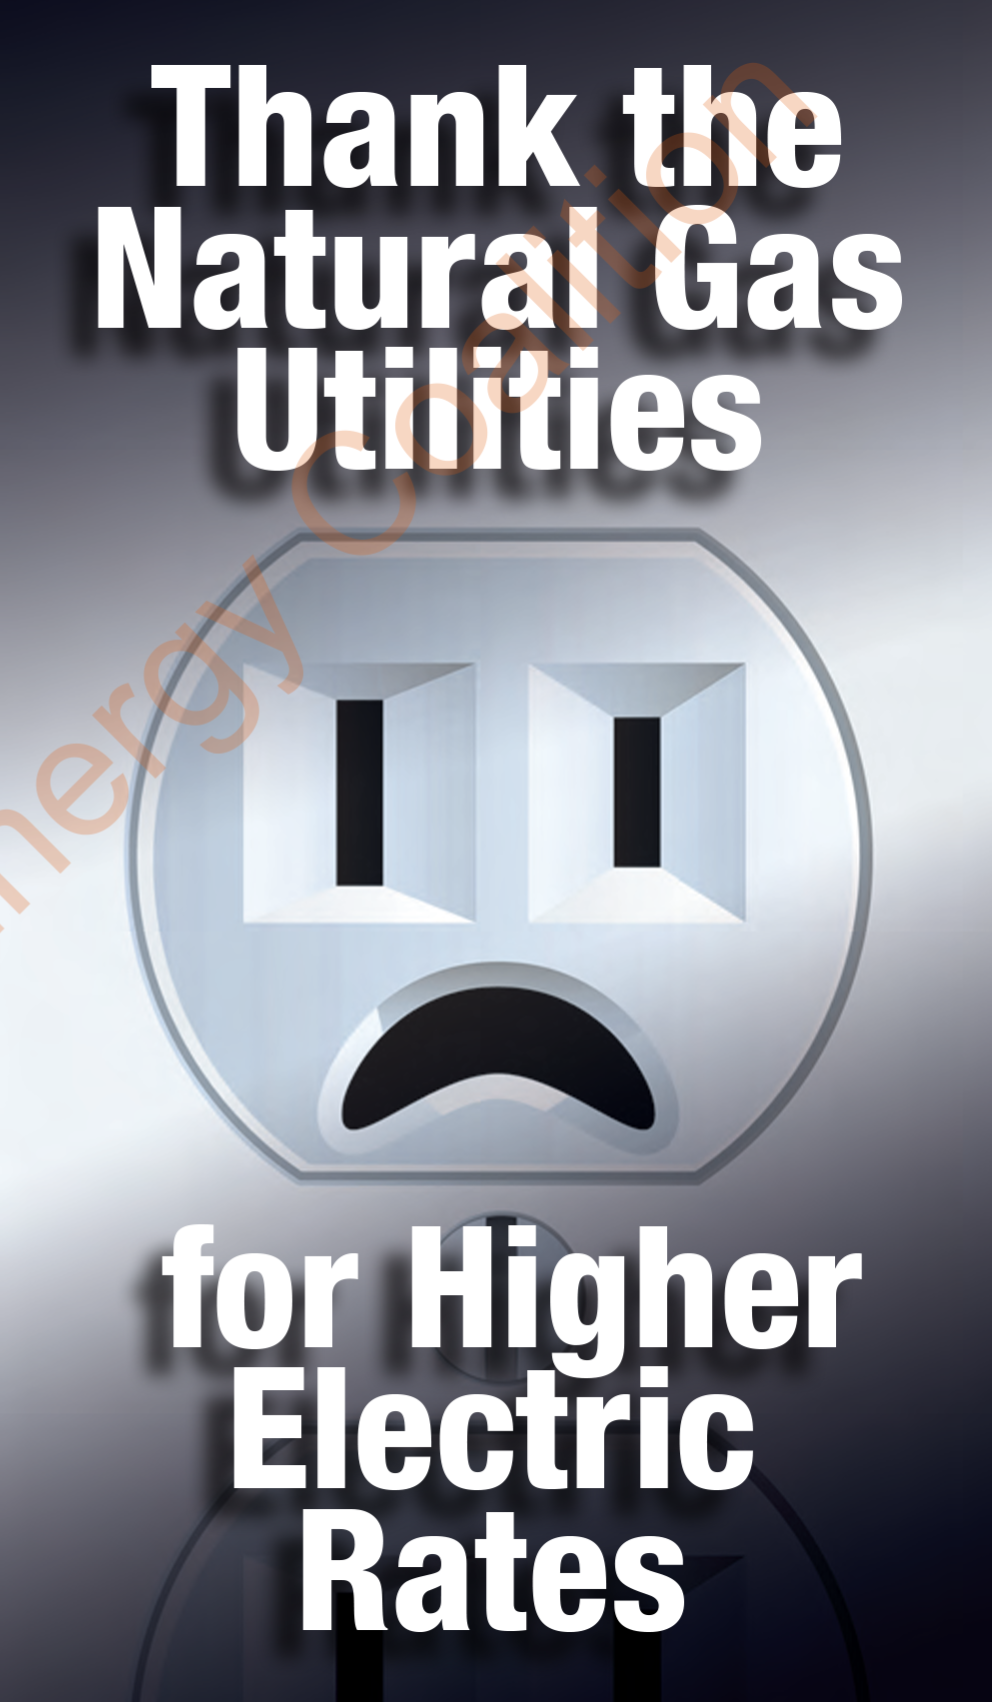 Thank the Natural Gas Utilities for Higher Electric Rates